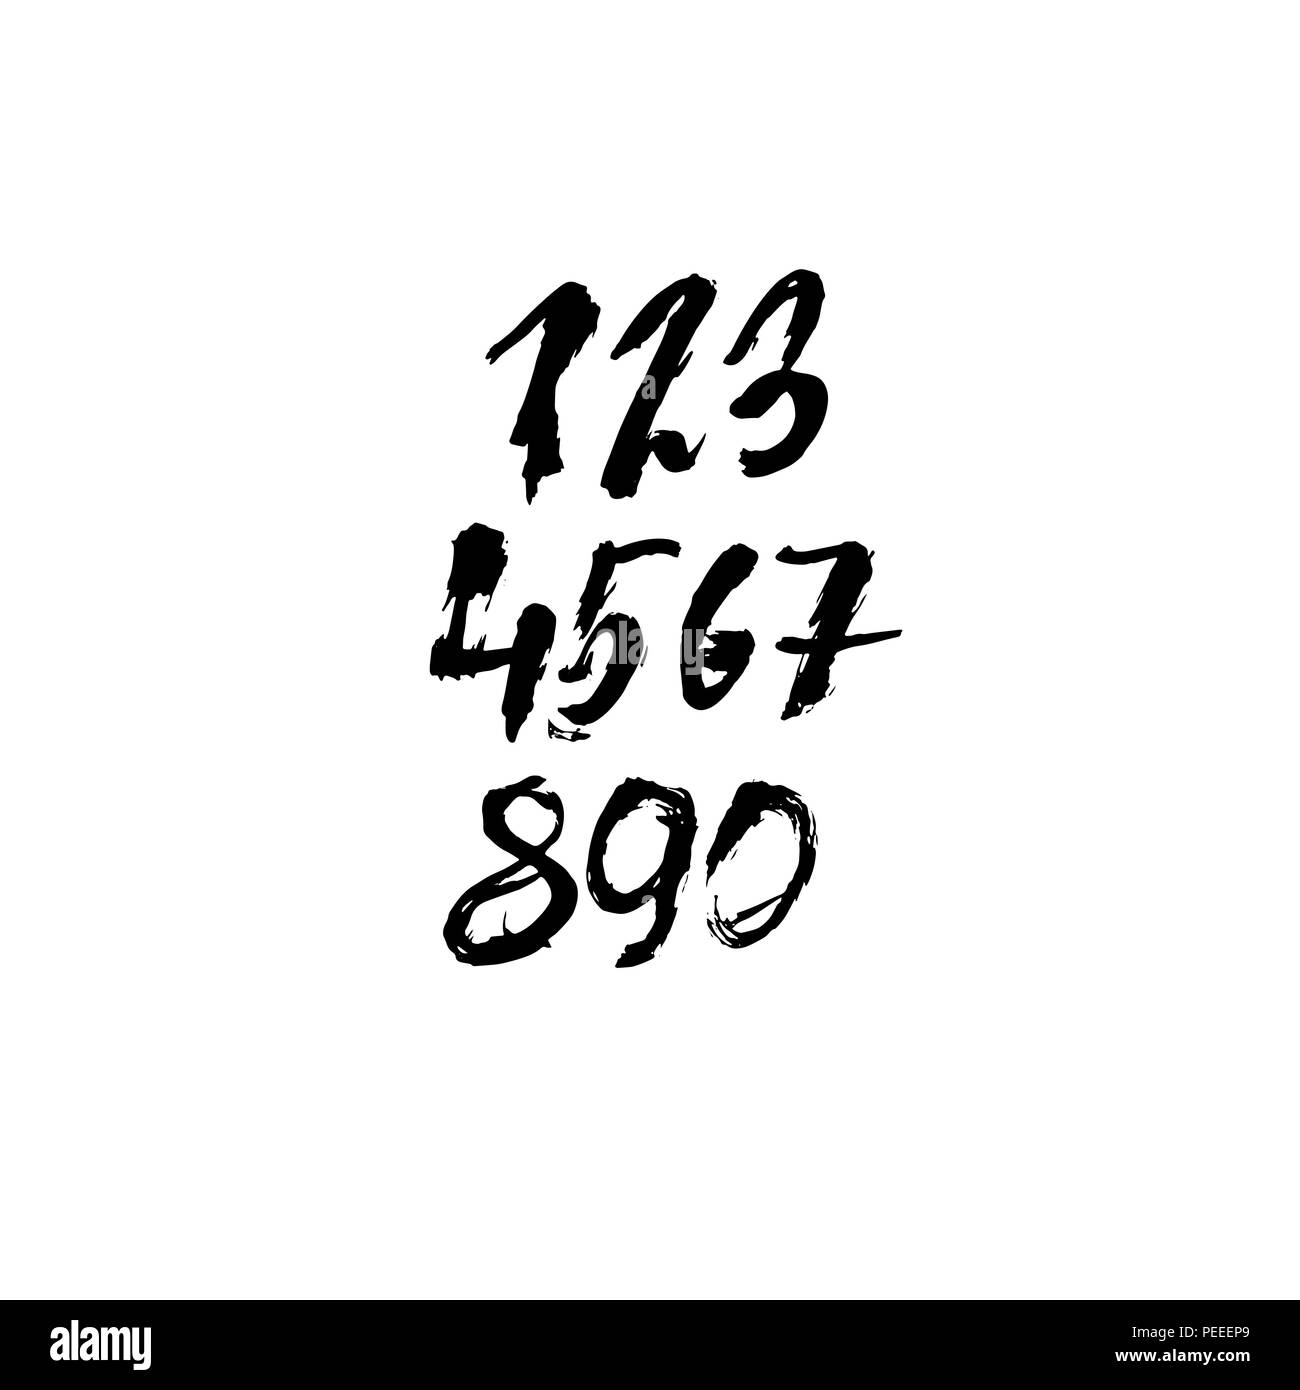 Set of calligraphic ink numbers. Textured dry brush lettering. Vector illustration. Stock Vector